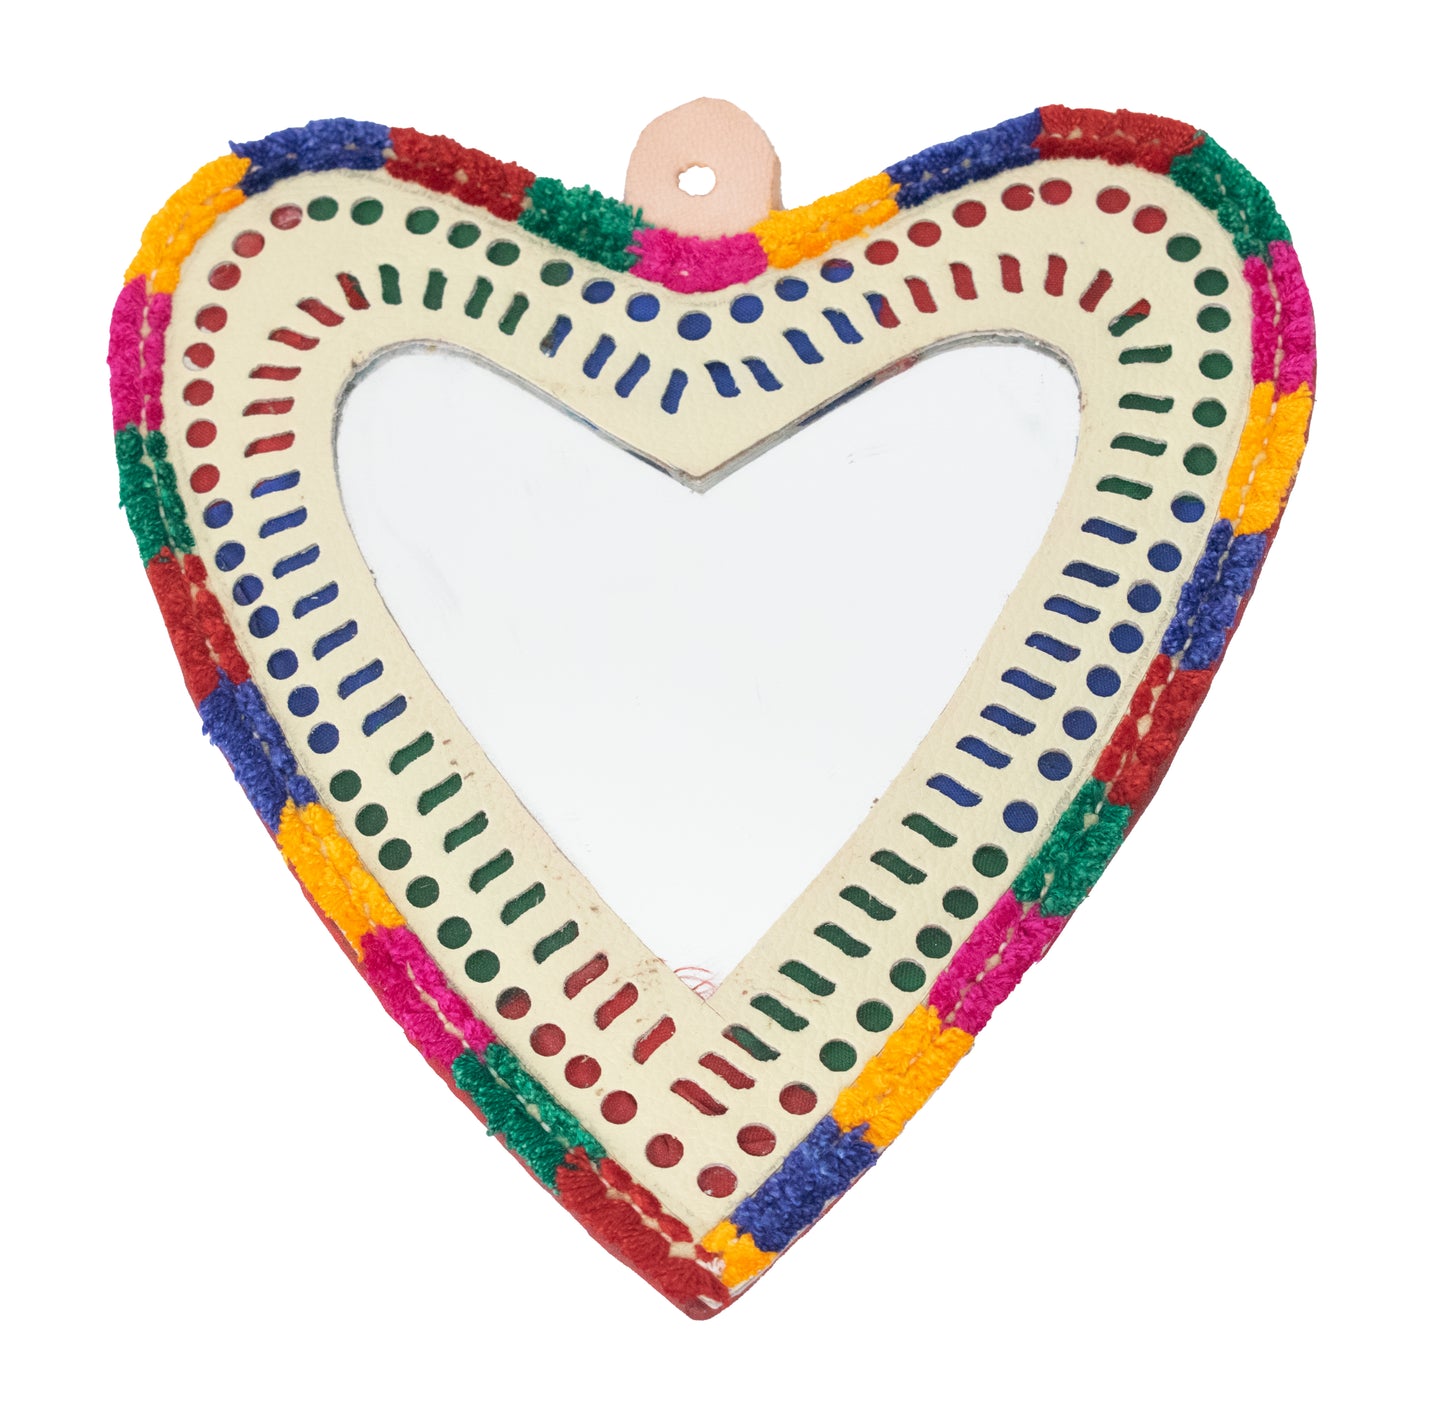 Heart Small Mirror Leather Craft    -  SKU: 0018